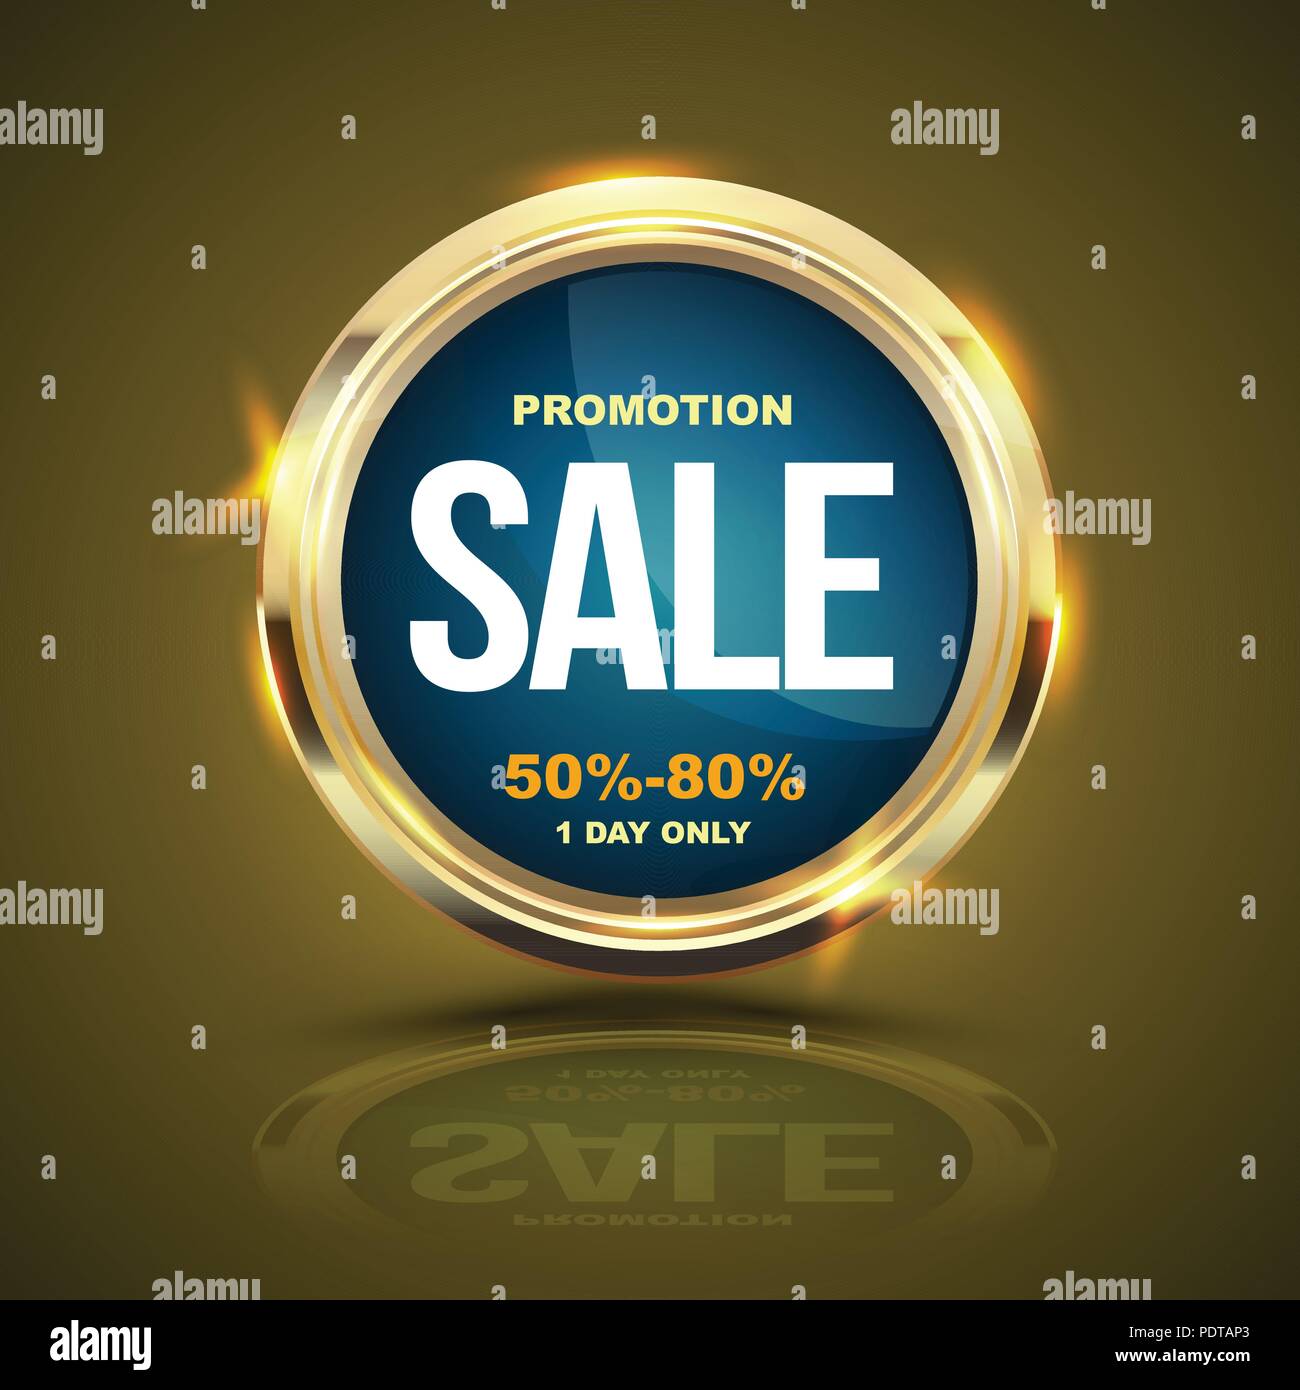 SALE banner gold circle for promotion advertising. Vector illustration. Stock Vector